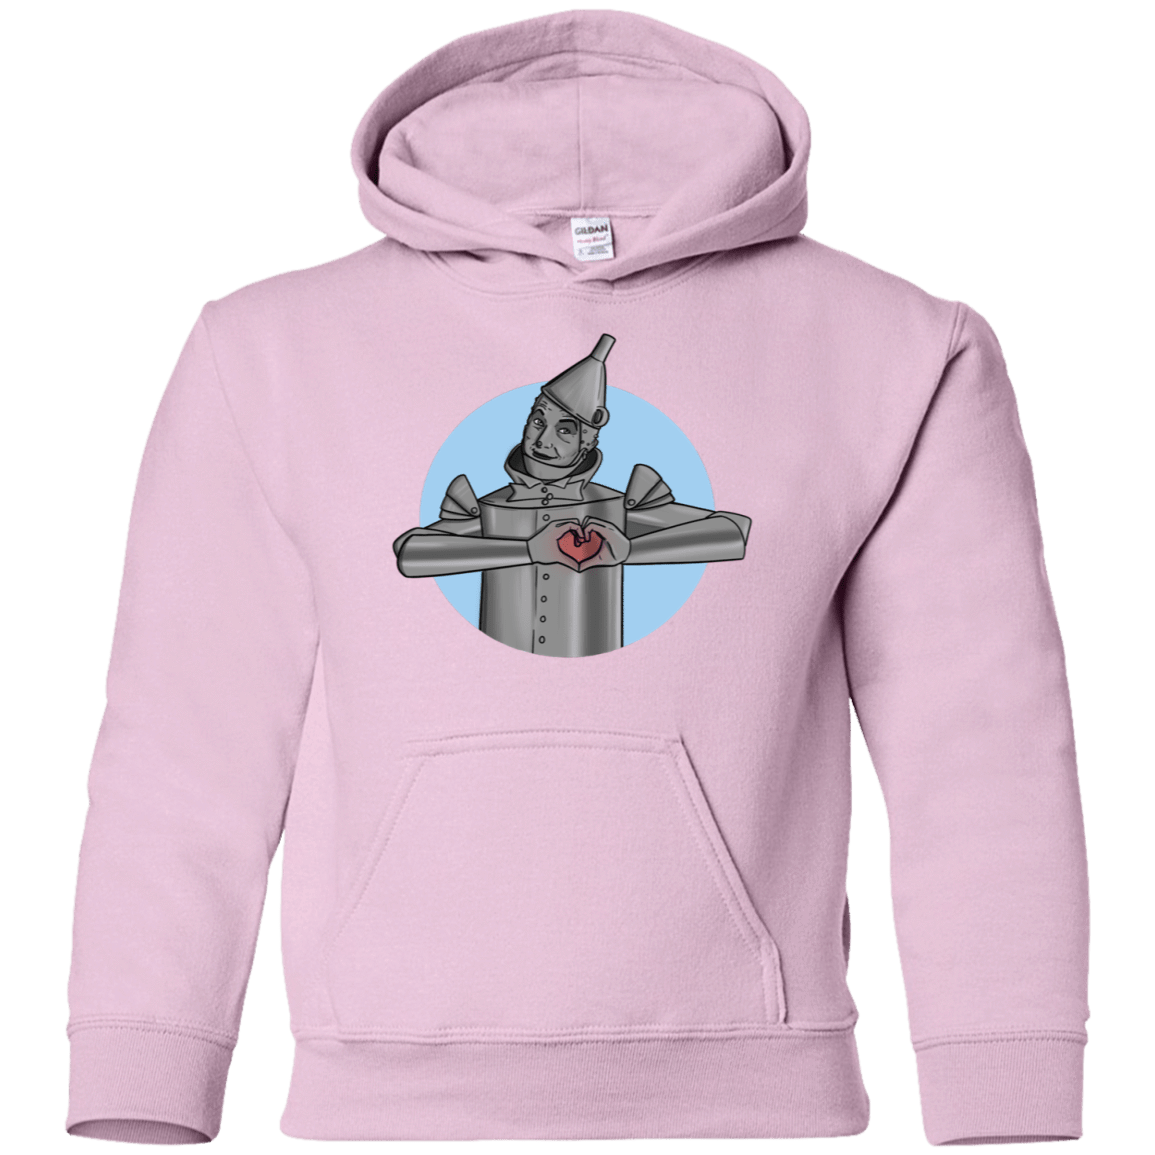 Sweatshirts Light Pink / YS I Have a Heart Youth Hoodie